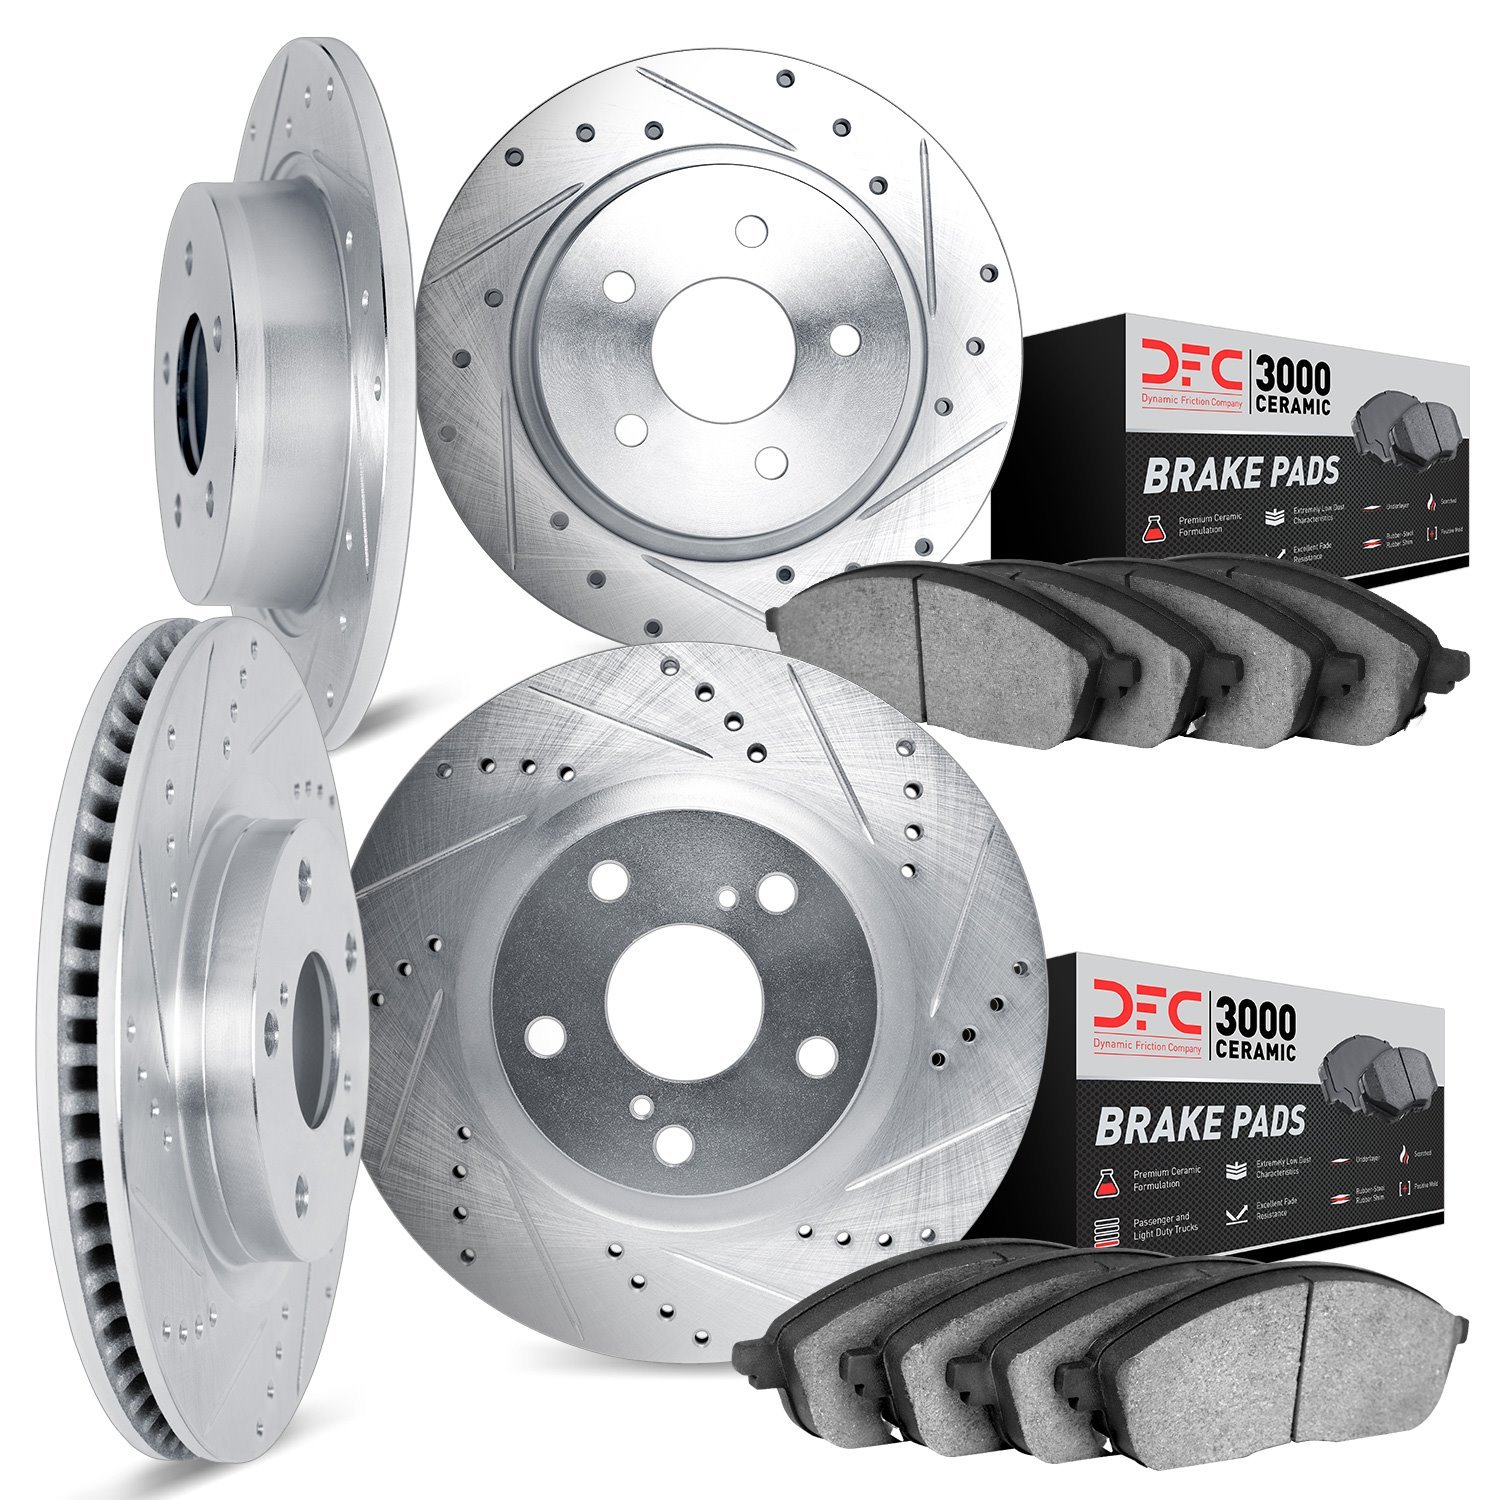 7304-74027 Drilled/Slotted Brake Rotor with 3000-Series Ceramic Brake Pads Kit [Silver], 1999-2010 Audi/Volkswagen, Position: Fr